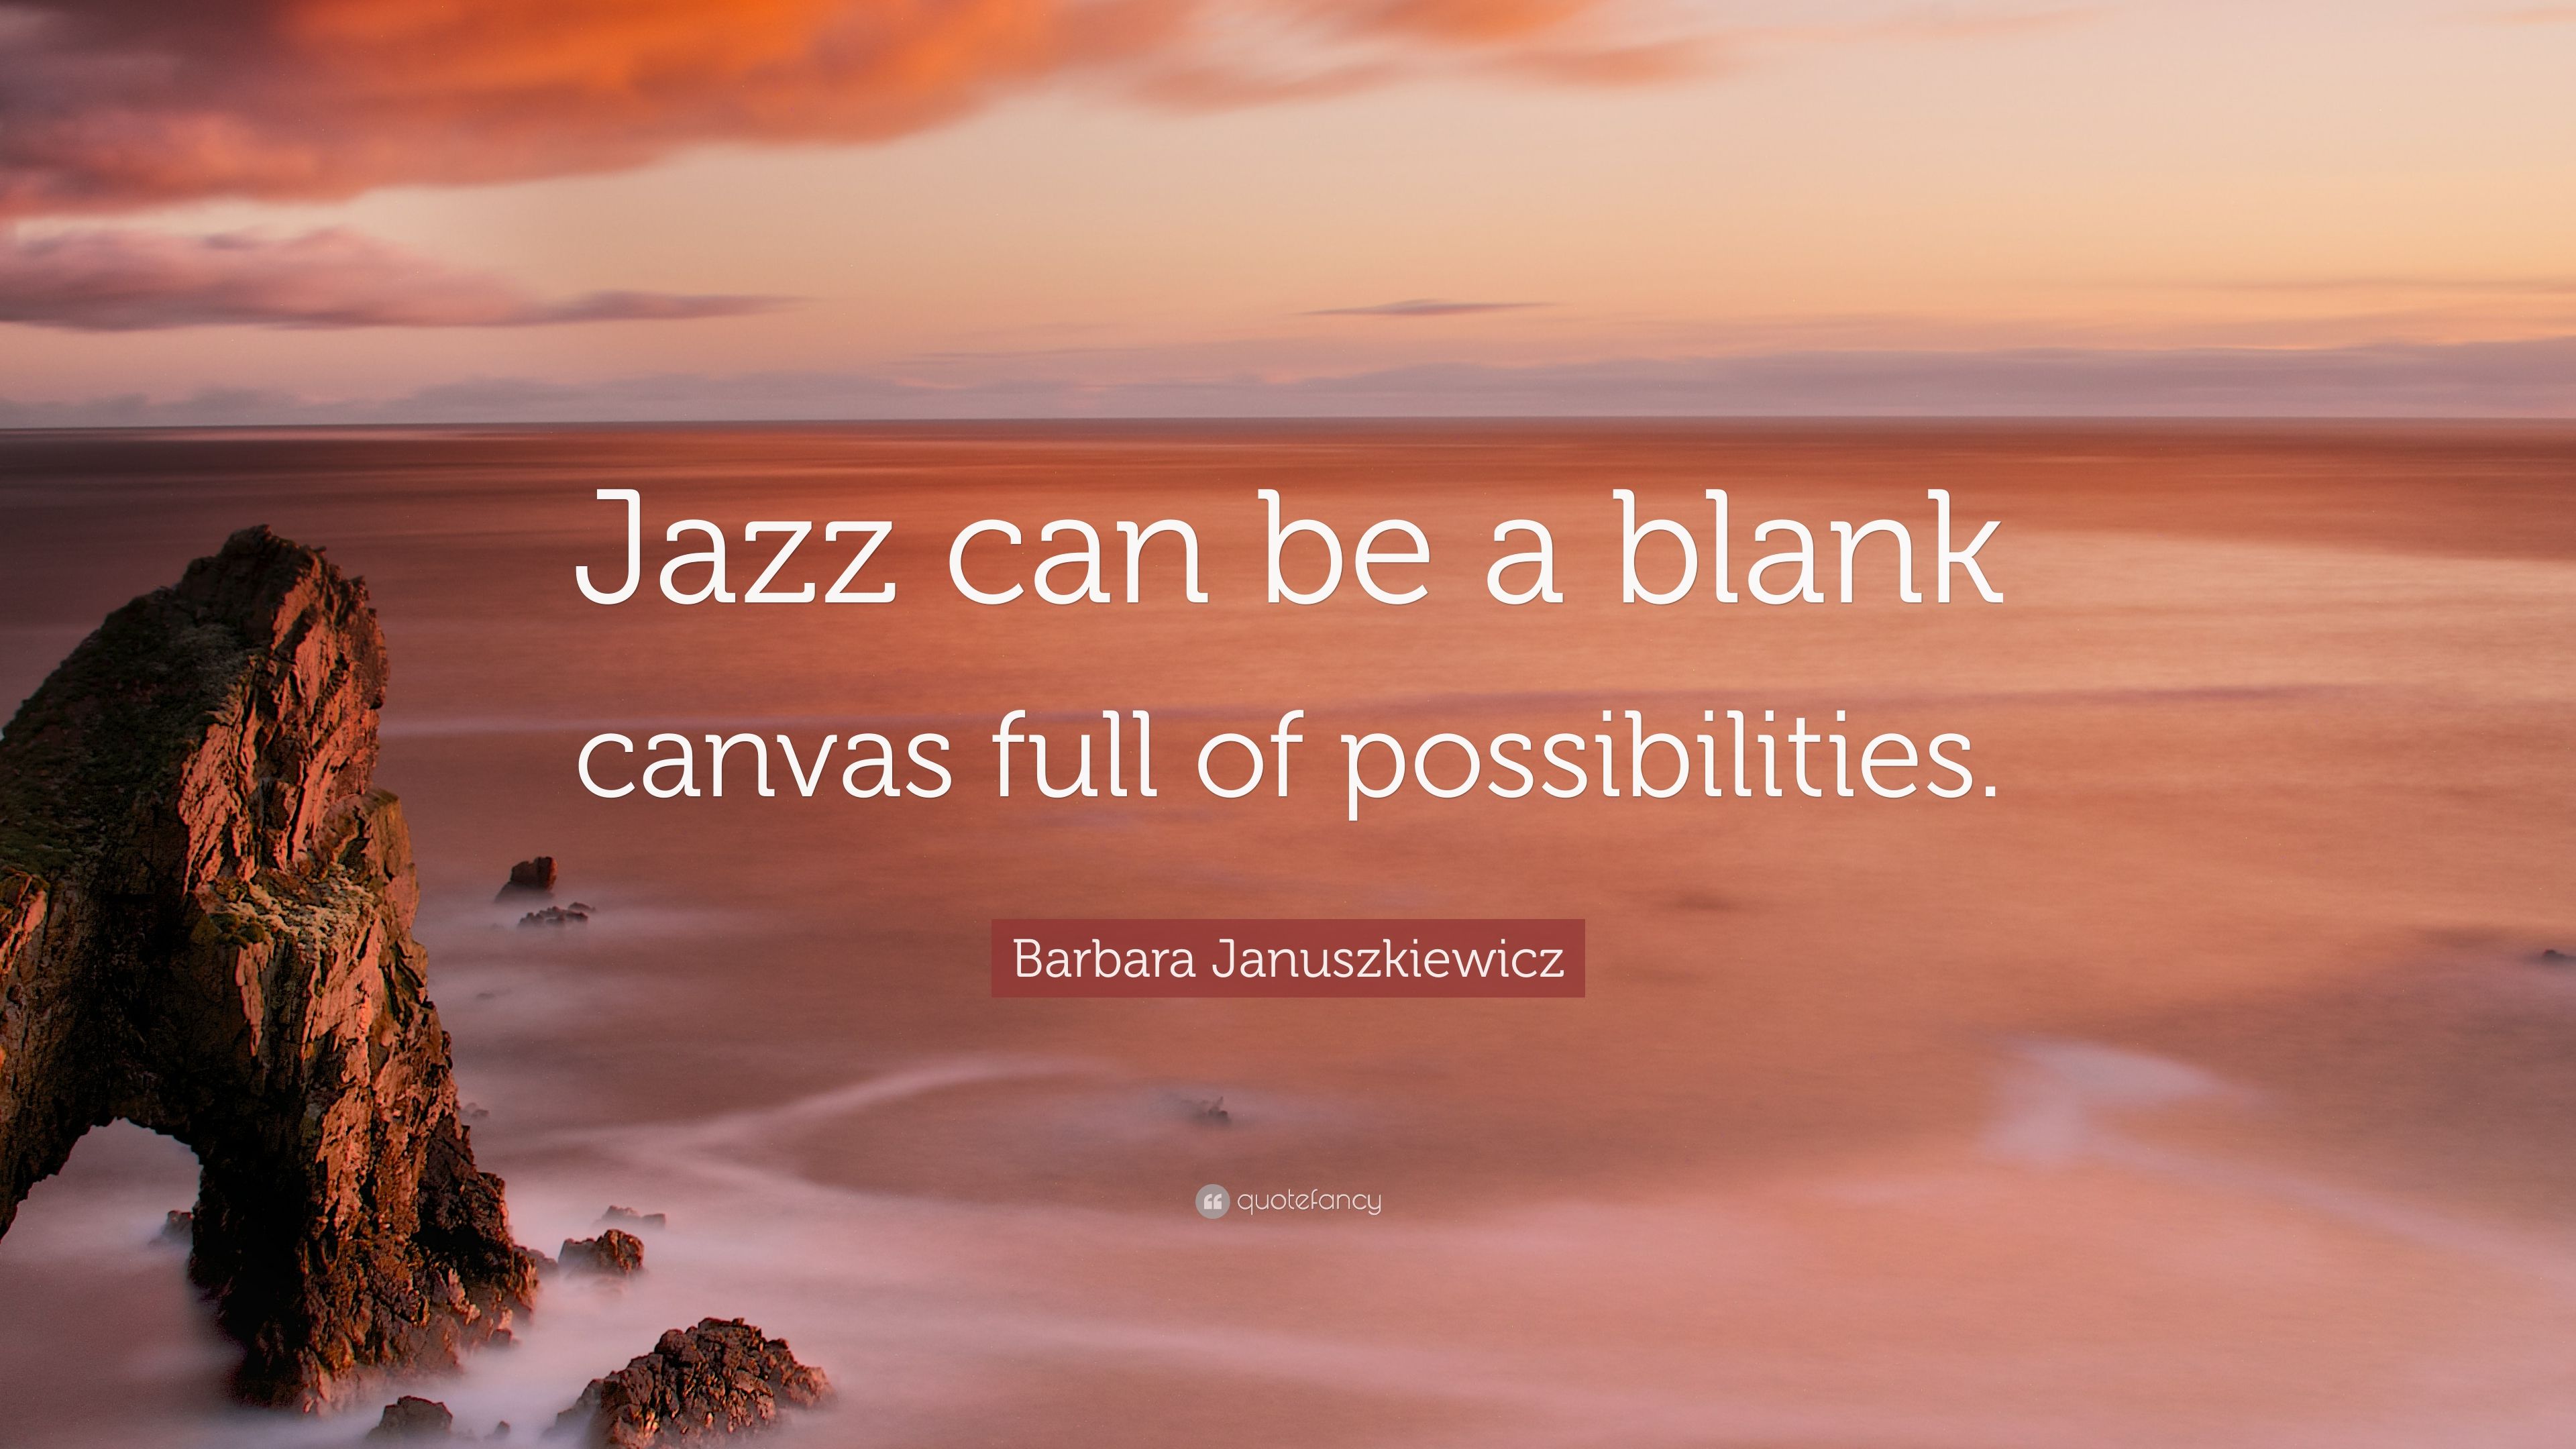 Barbara Januszkiewicz Quote: “Jazz can be a blank canvas full